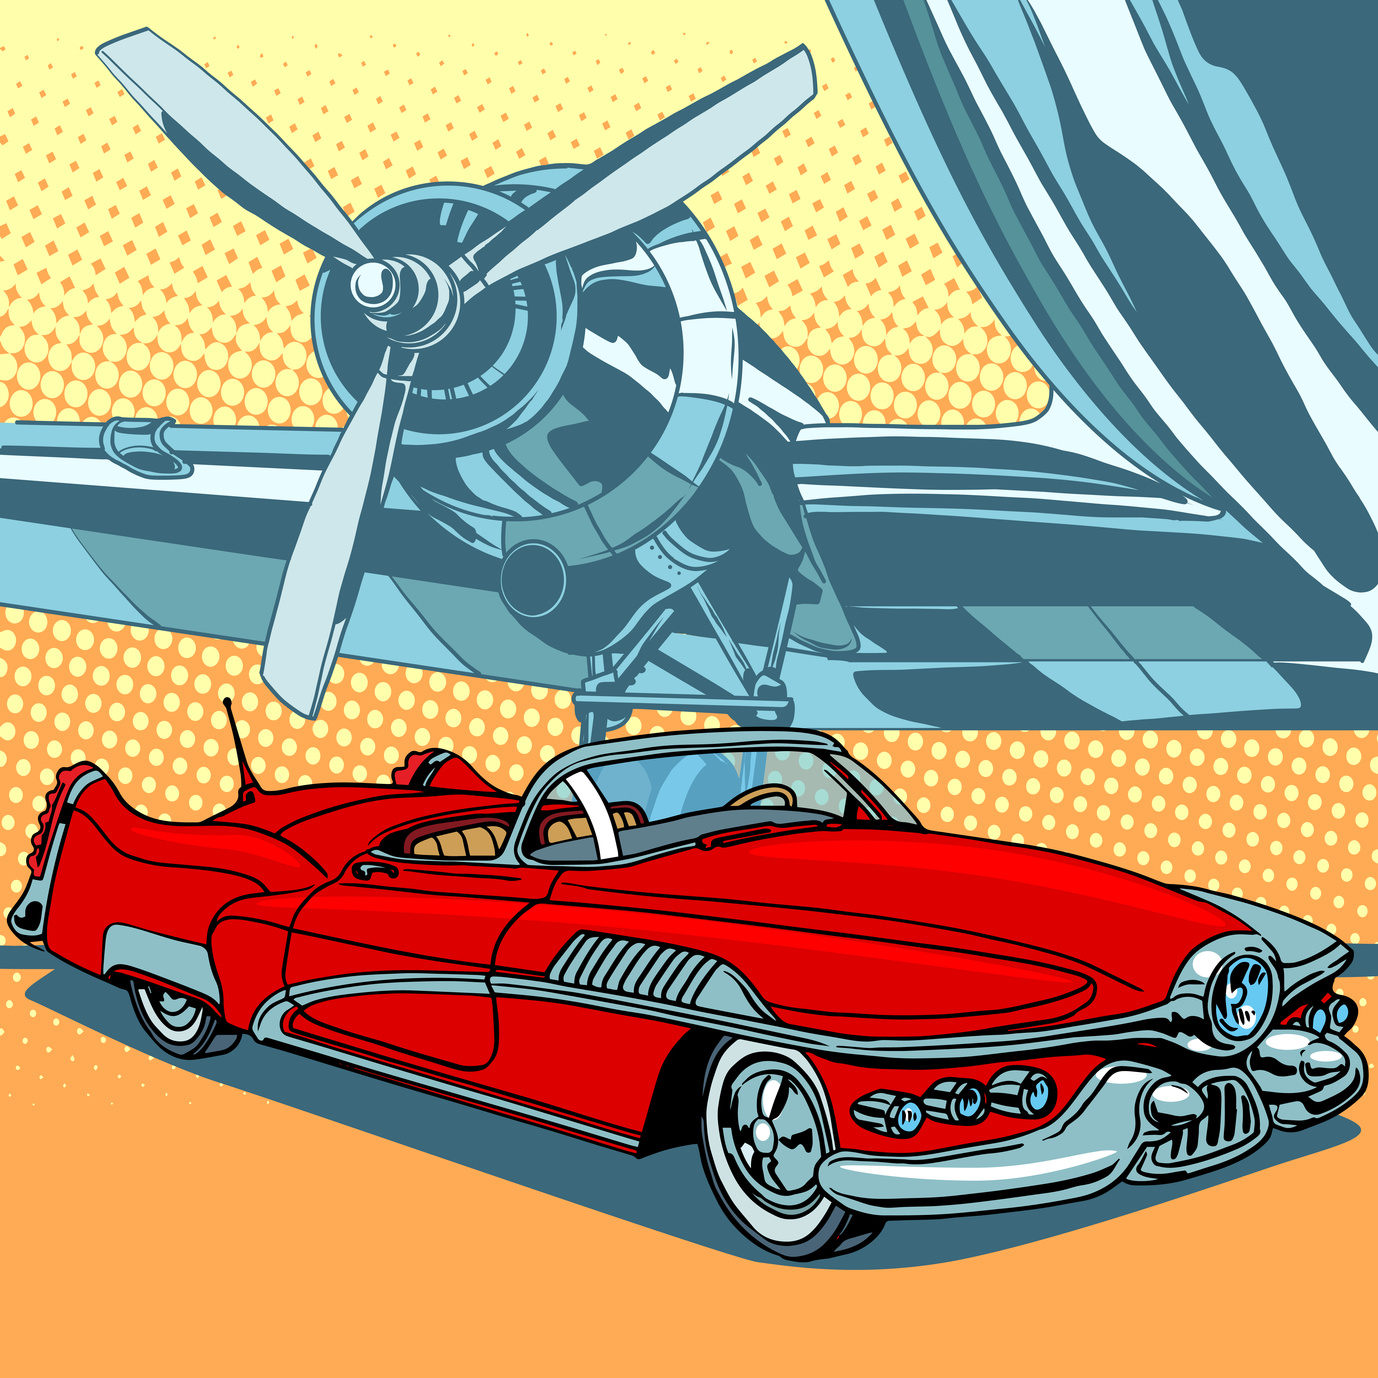 Retro car on the runway pop art retro style. The private plane. Travel and tourism. Retro transport